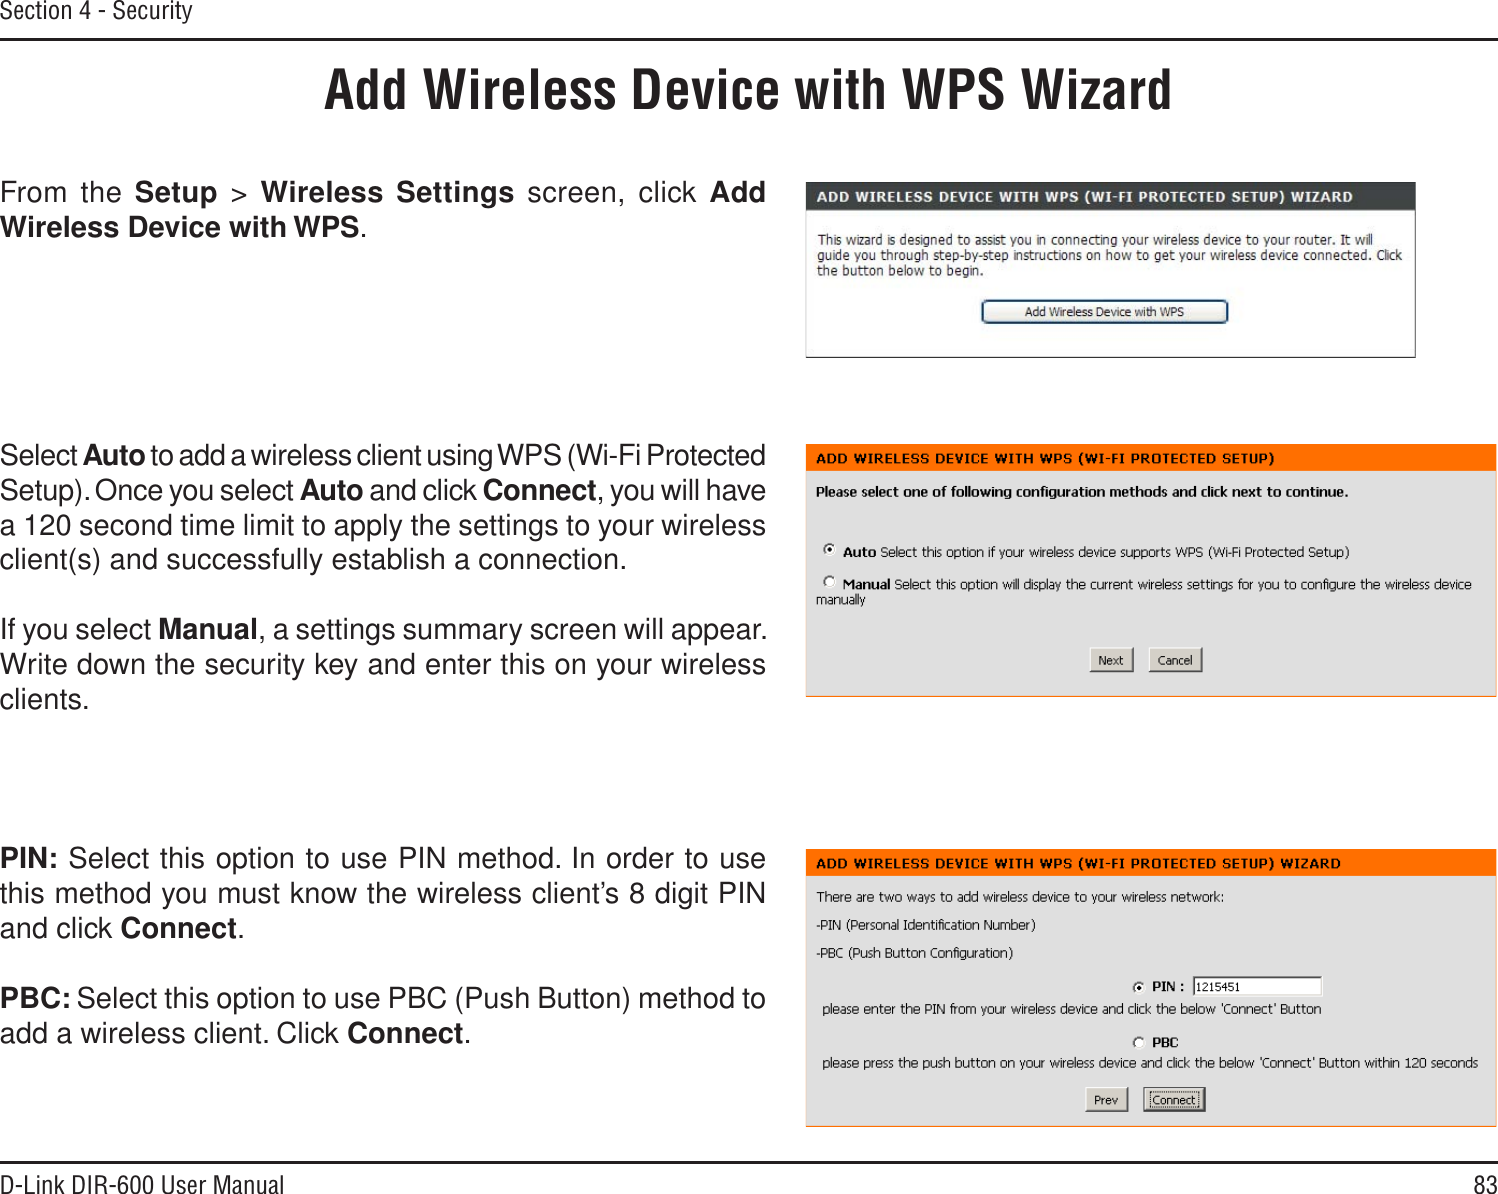 83D-Link DIR-600 User ManualSection 4 - SecurityFrom the Setup &gt; Wireless Settings screen, click AddWireless Device with WPS.Add Wireless Device with WPS WizardPIN: Select this option to use PIN method. In order to use this method you must know the wireless client’s 8 digit PIN and click Connect.PBC: Select this option to use PBC (Push Button) method to add a wireless client. Click Connect.Select Auto to add a wireless client using WPS (Wi-Fi Protected Setup). Once you select Auto and click Connect, you will have a 120 second time limit to apply the settings to your wireless client(s) and successfully establish a connection. If you select Manual, a settings summary screen will appear. Write down the security key and enter this on your wireless clients. 